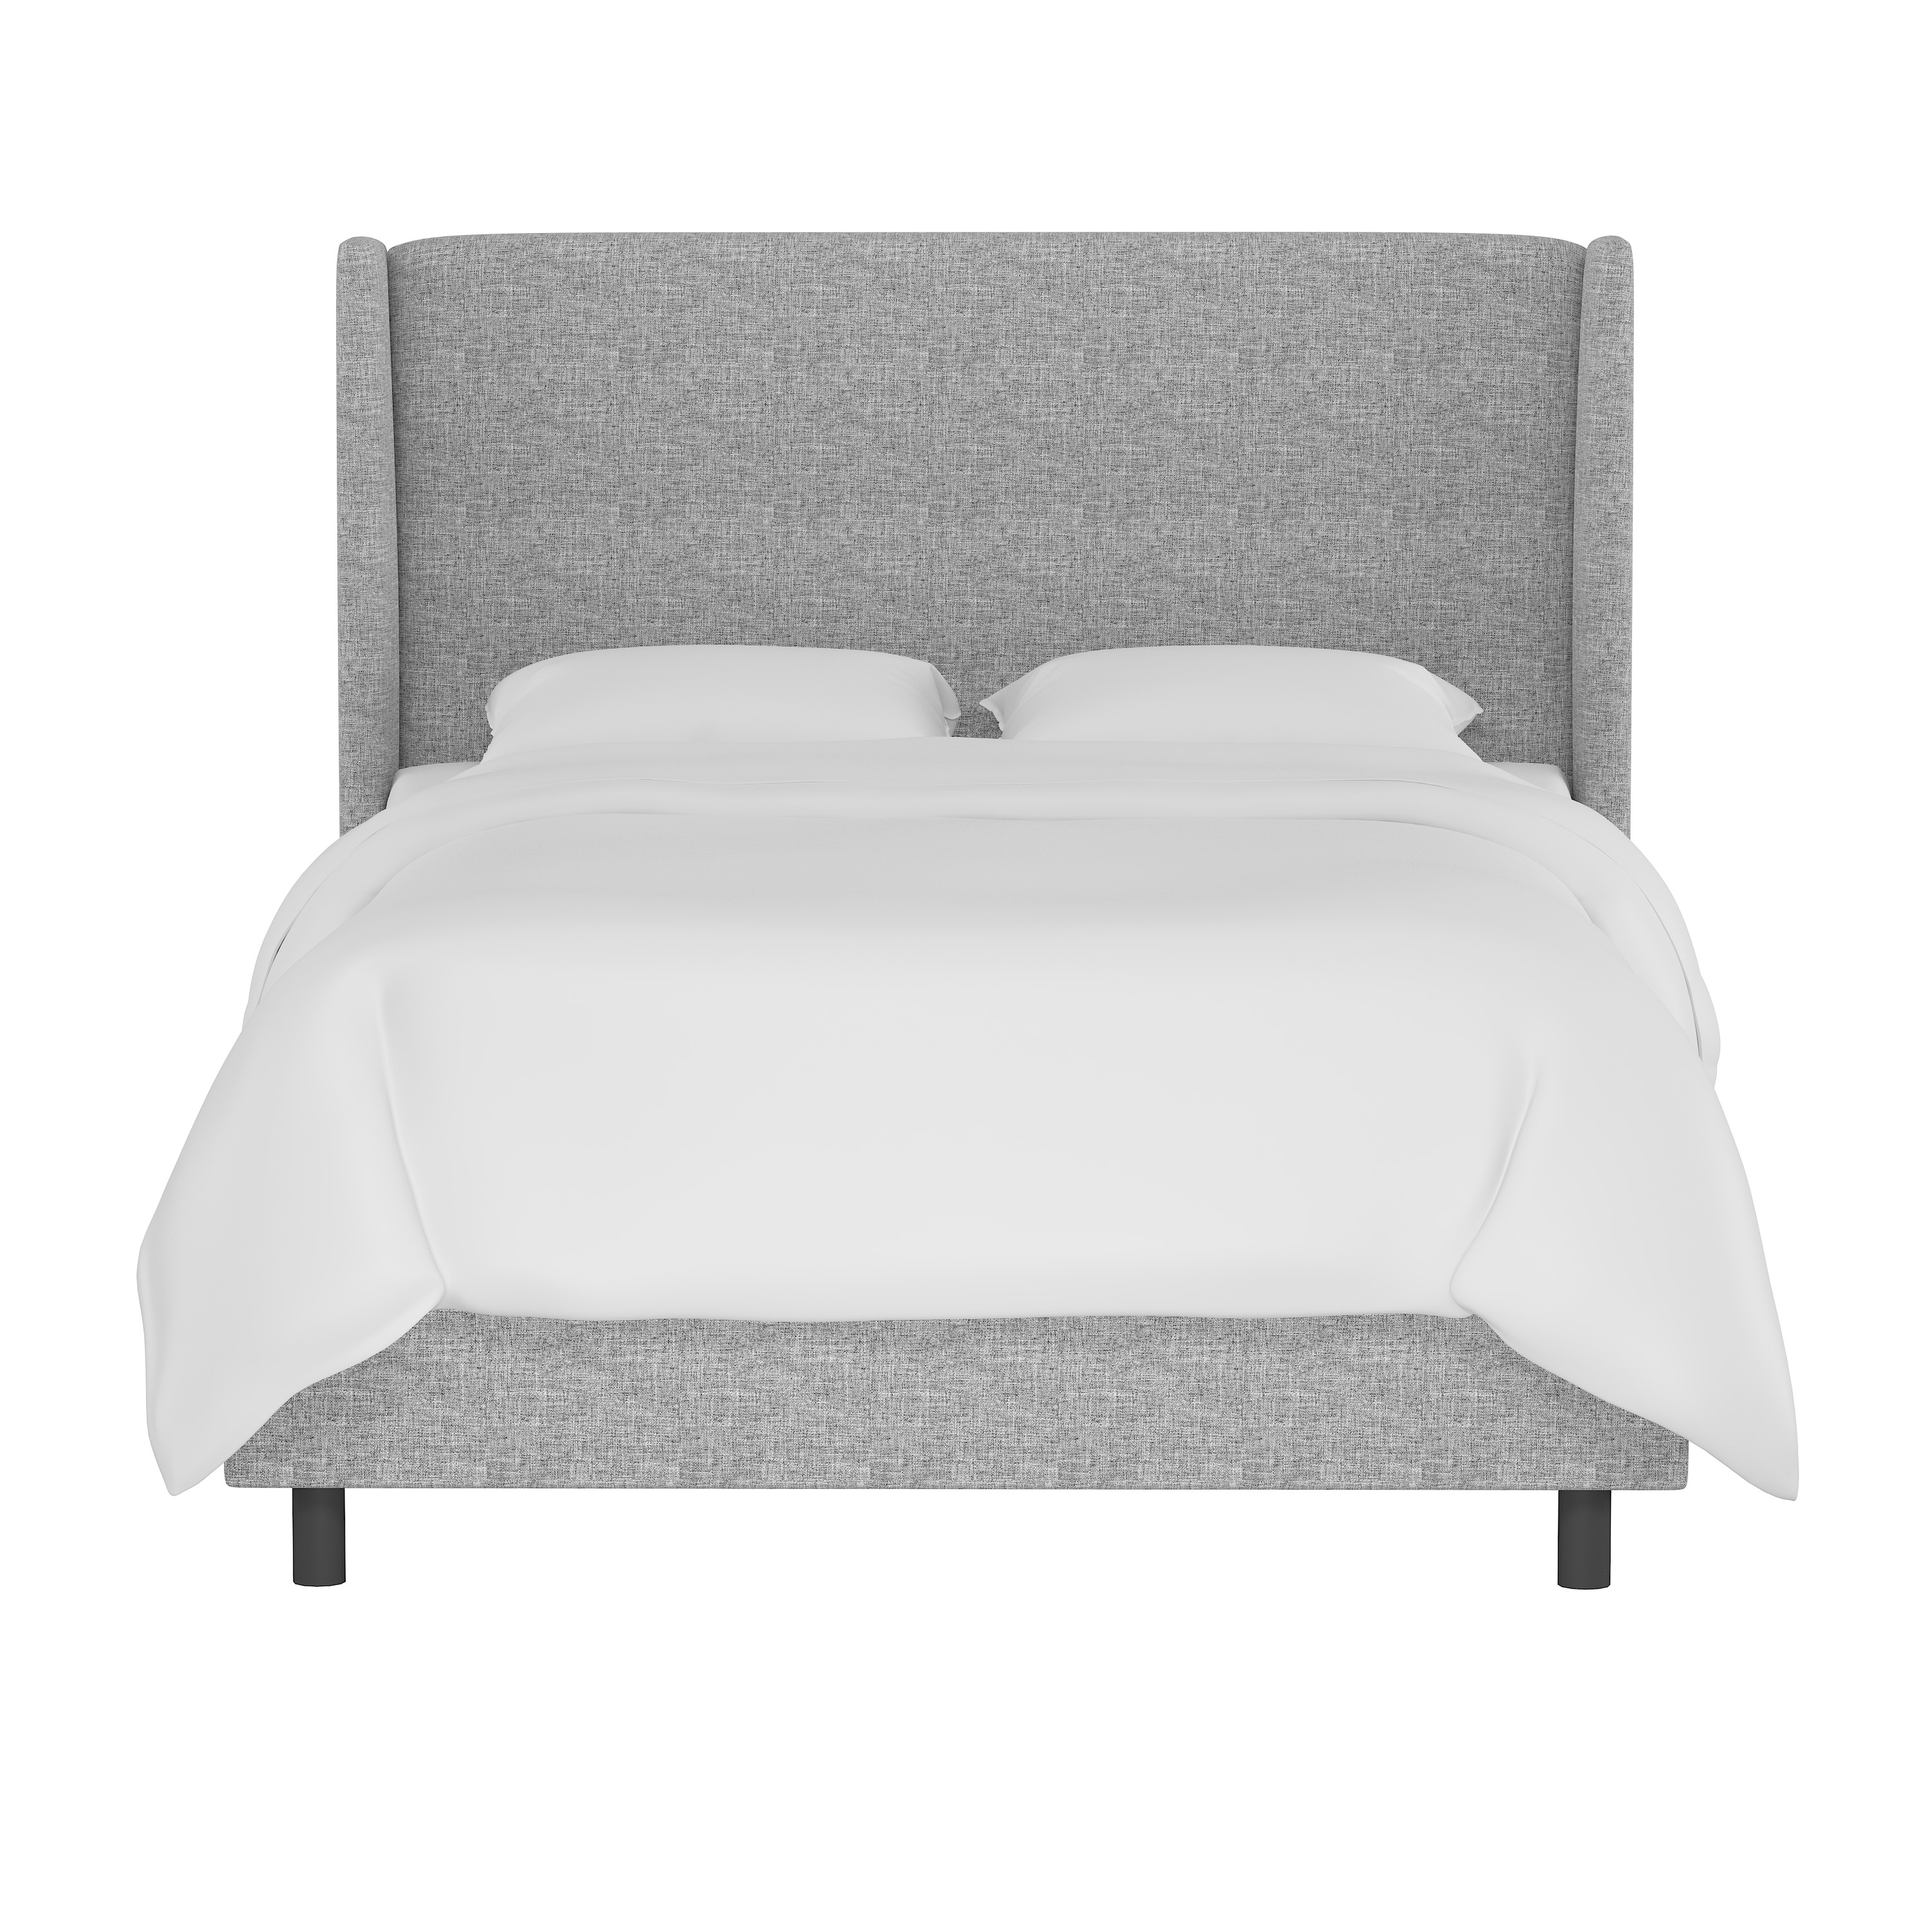 Queen Lawrence Wingback Bed - Third & Vine